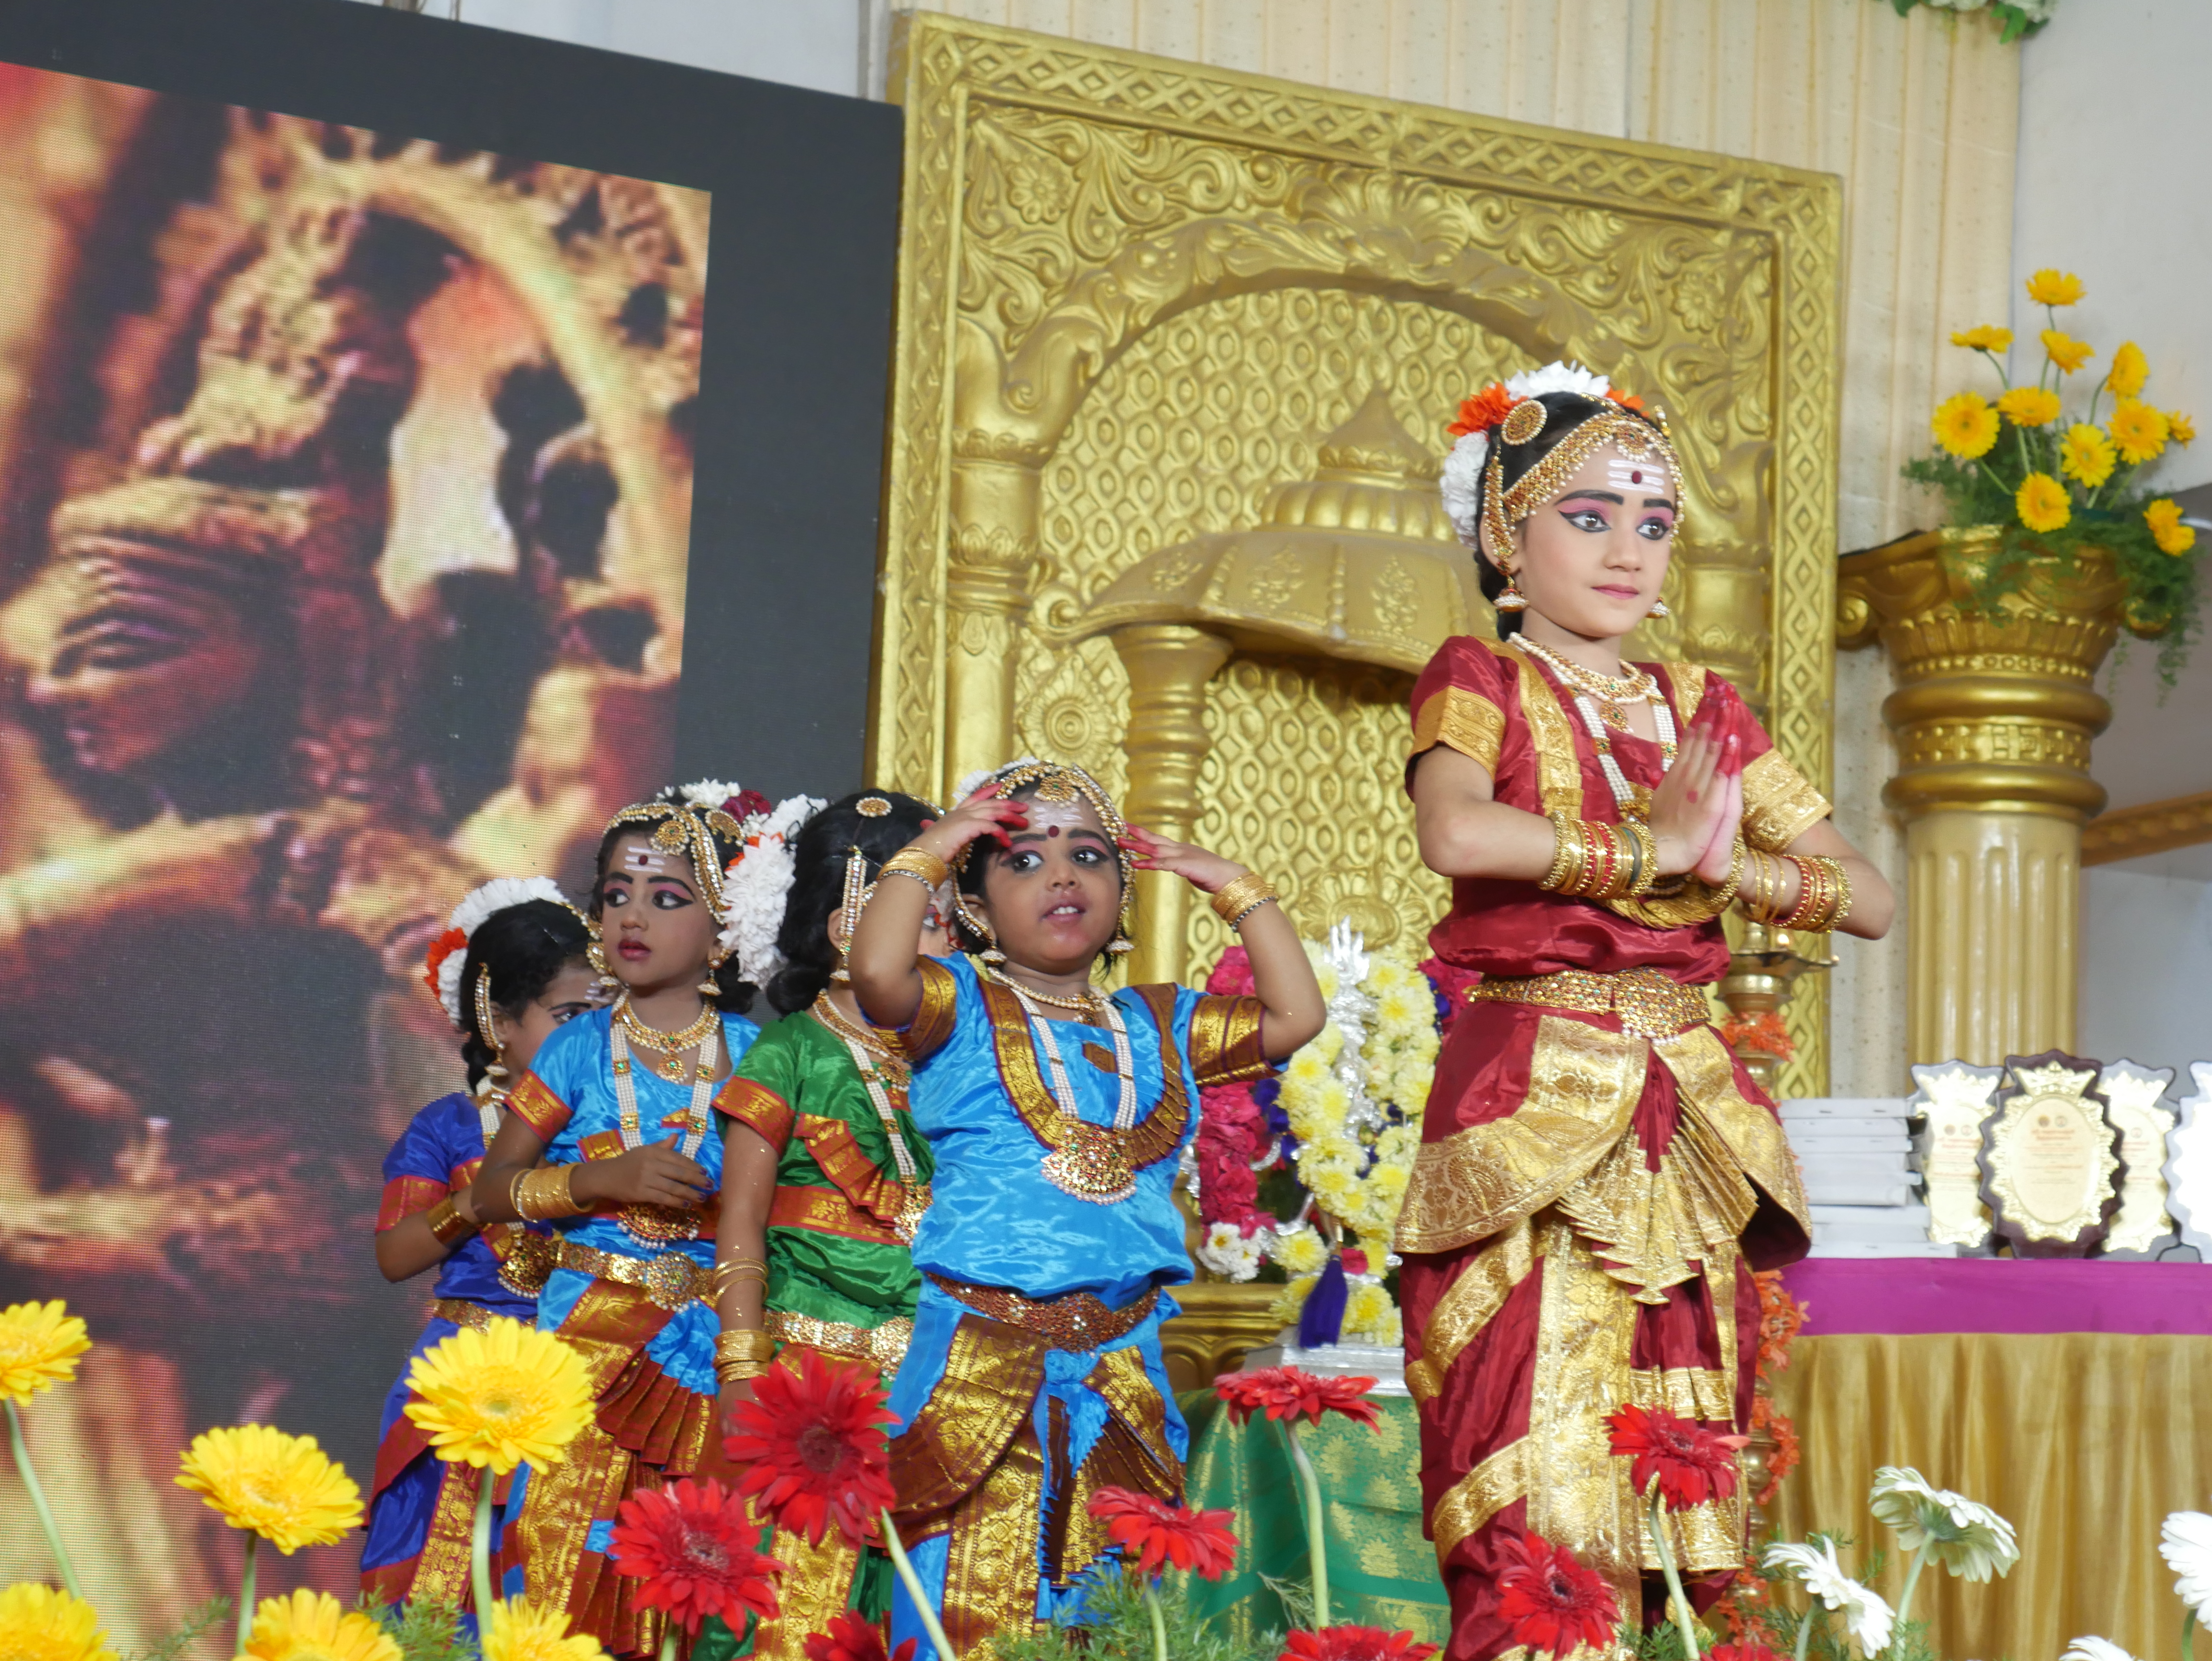 Bharatanatyam performance for 3 consecutive hours about  63 Nayanars through music and dance